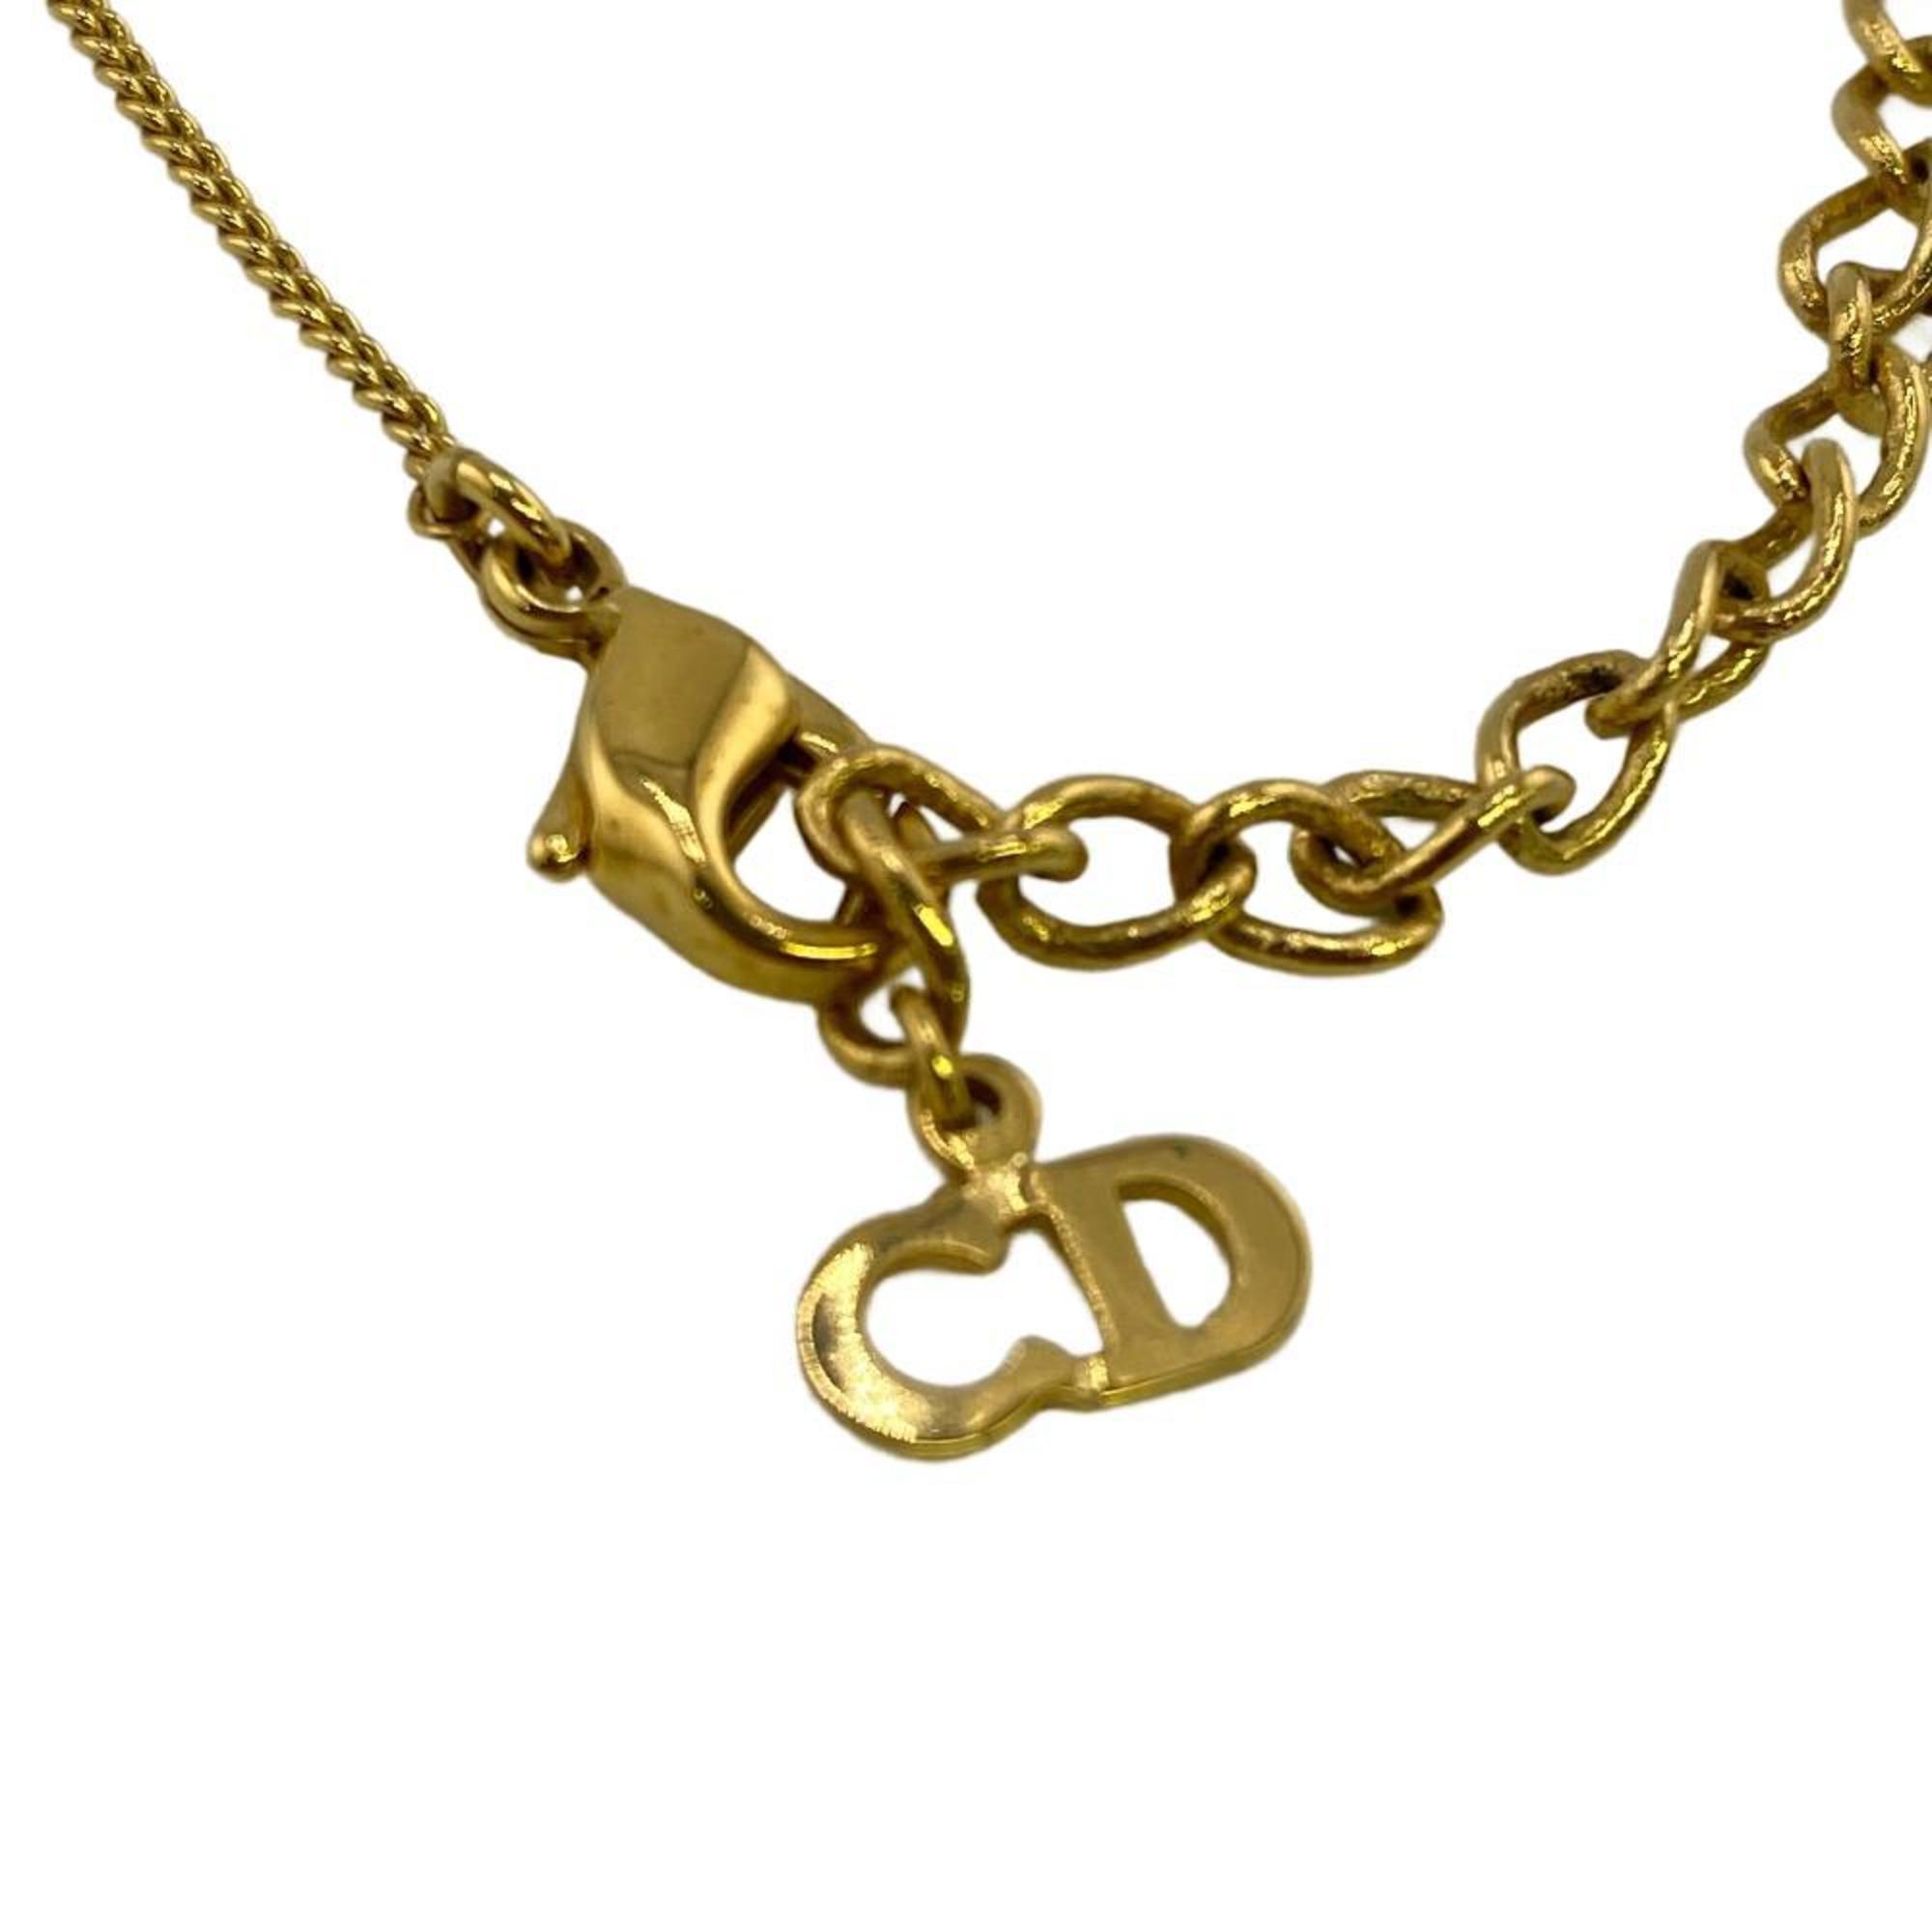 Christian Dior Dior CD Necklace Gold Women's Z0005661